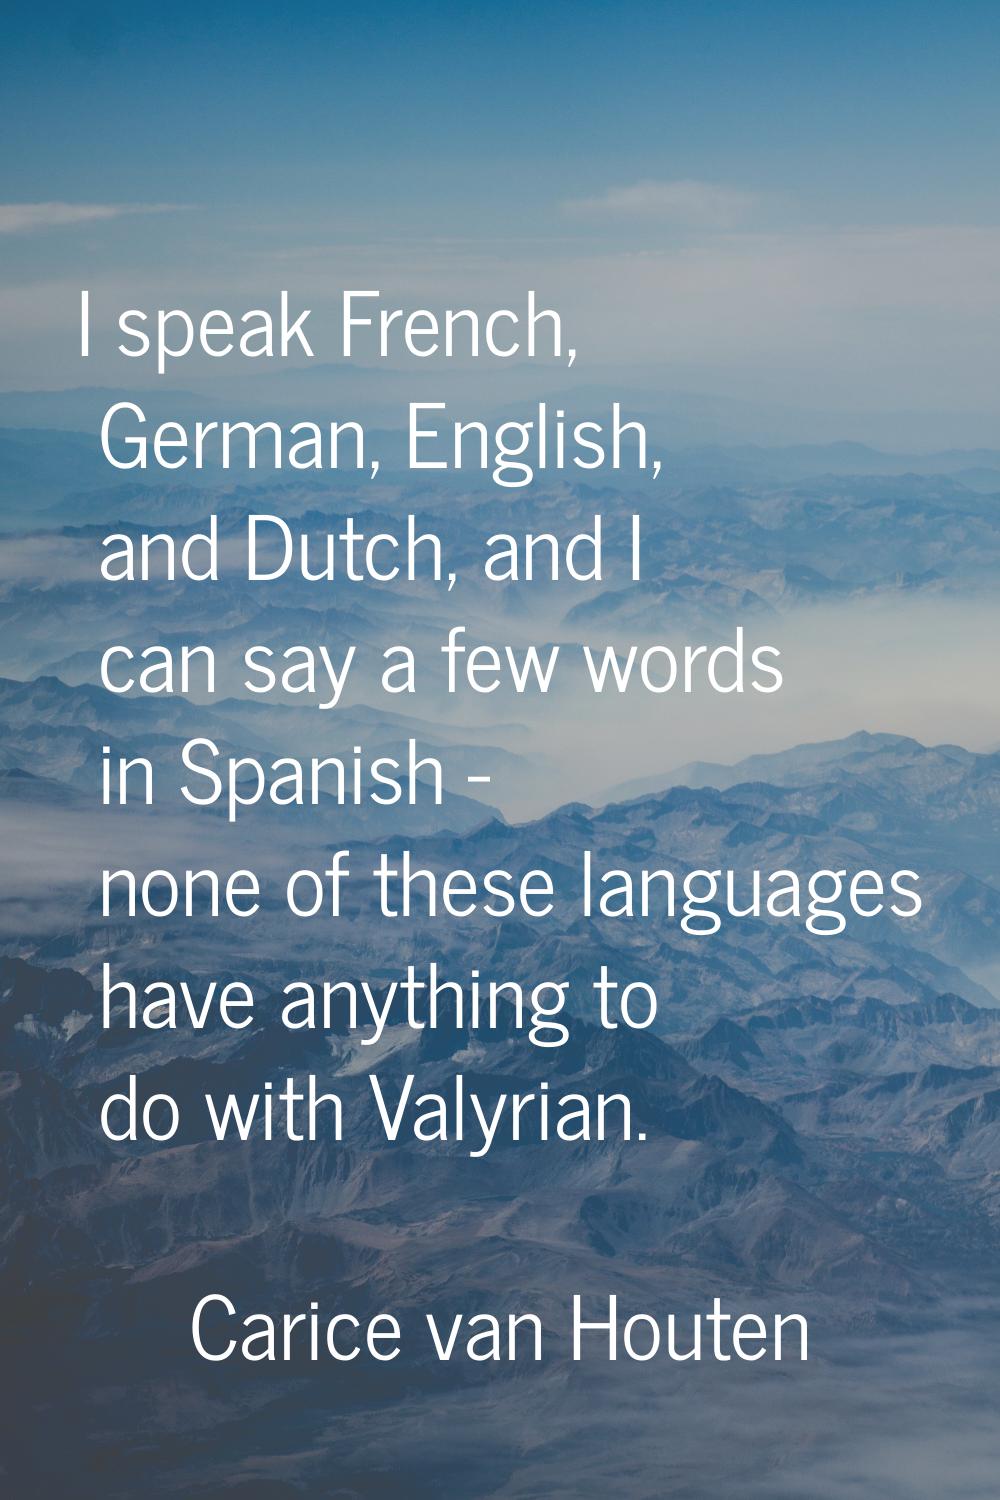 I speak French, German, English, and Dutch, and I can say a few words in Spanish - none of these la